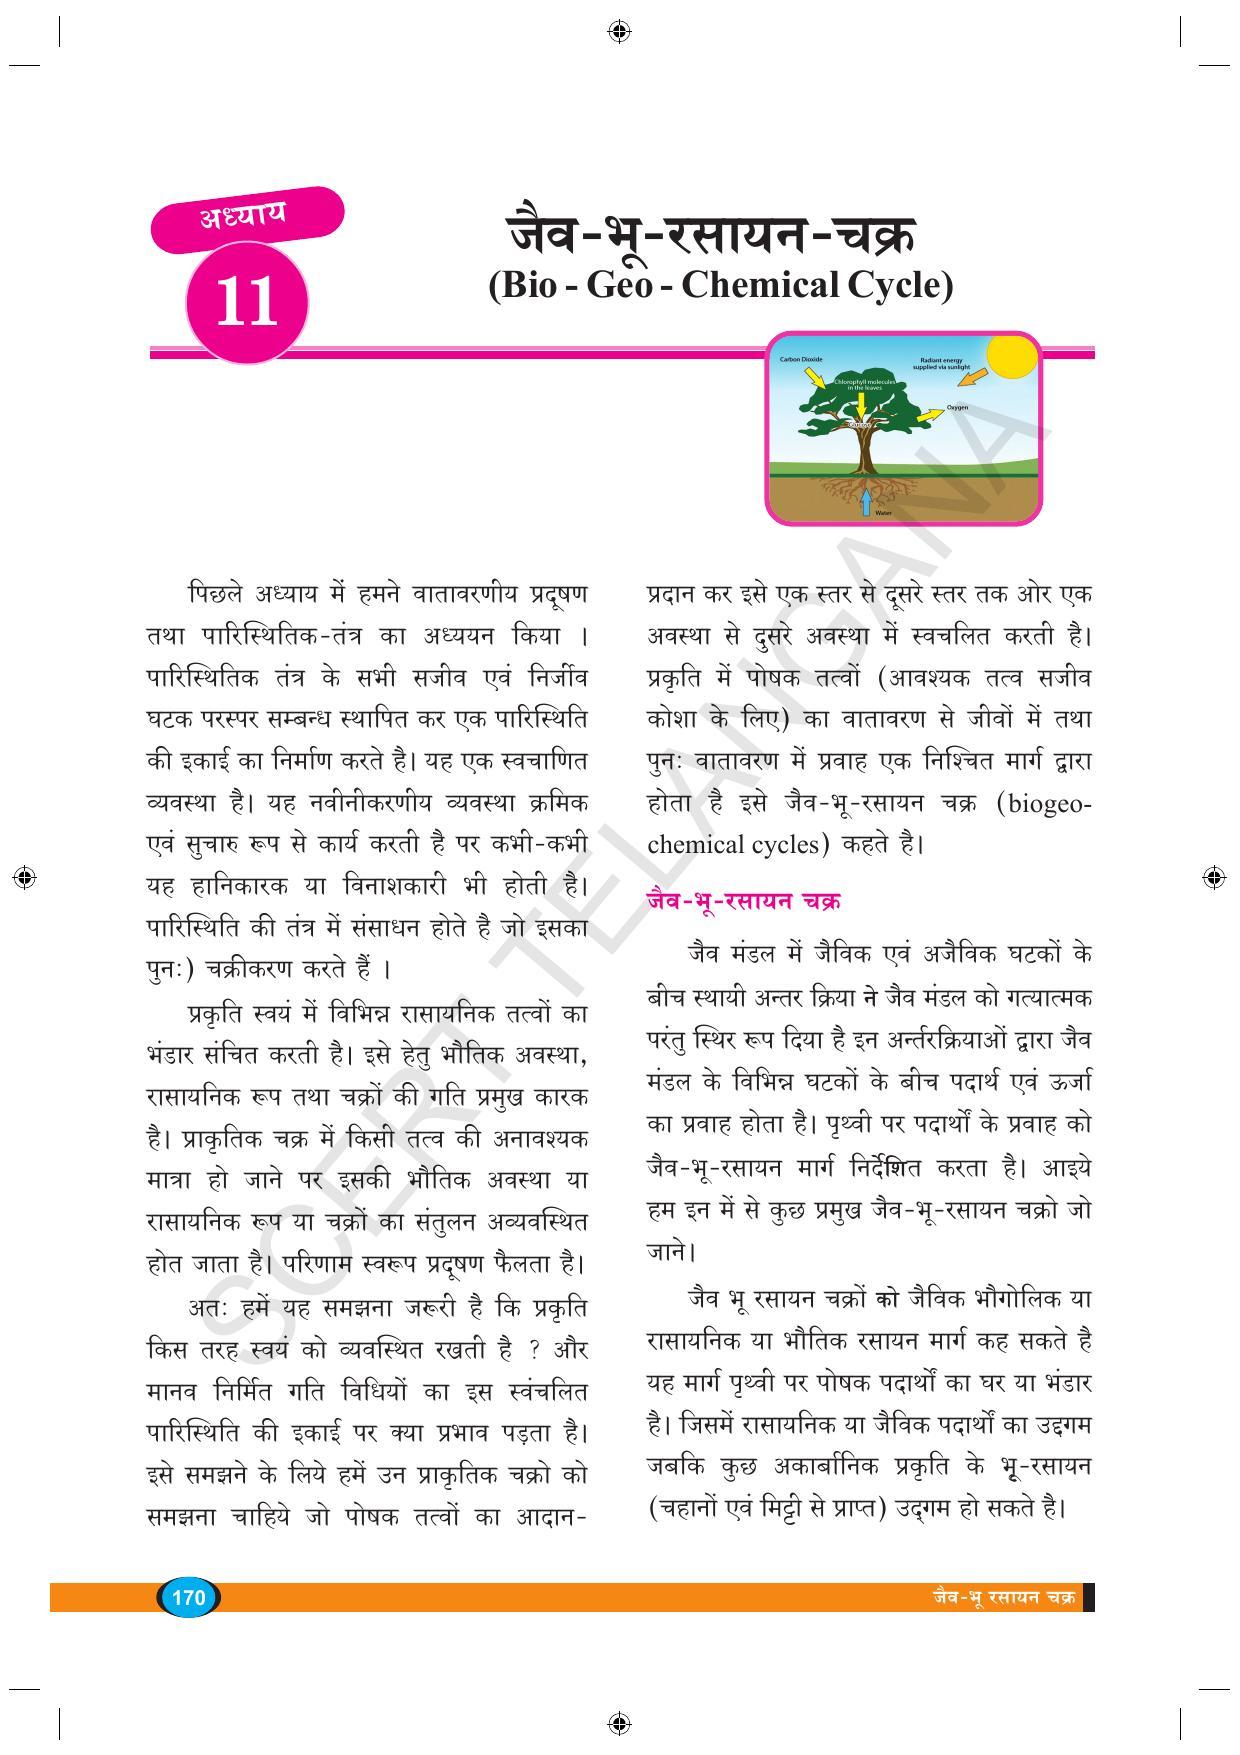 TS SCERT Class 9 Biological Science (Hindi Medium) Text Book - Page 182